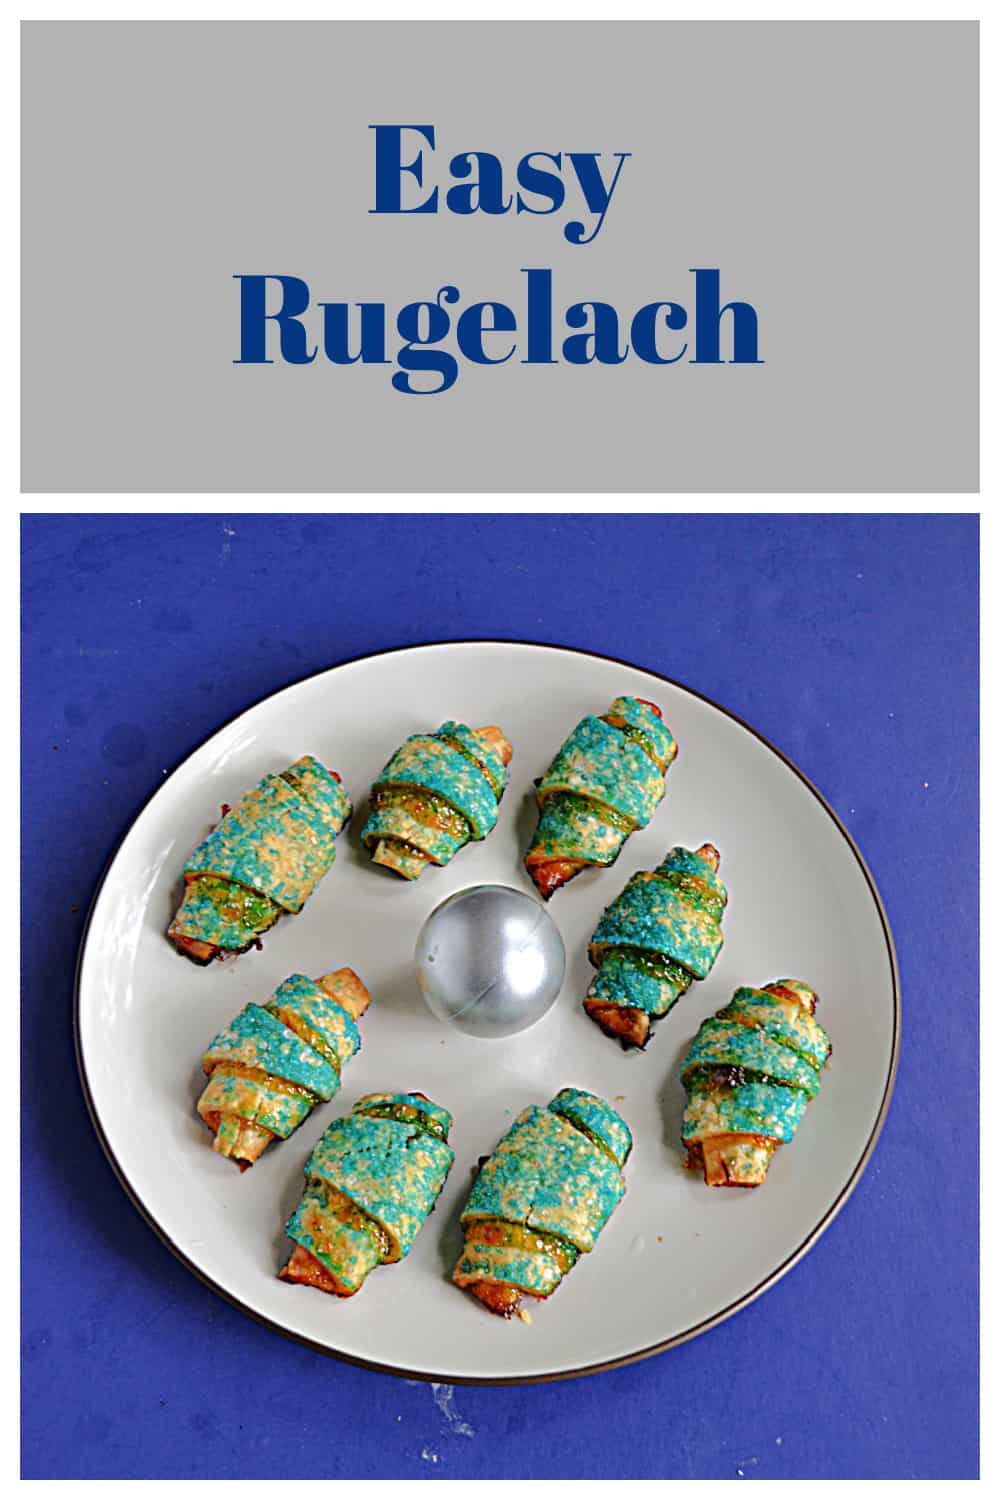 Pin Image:   Text title, a plate of Rugelach with blue sprinkles. 